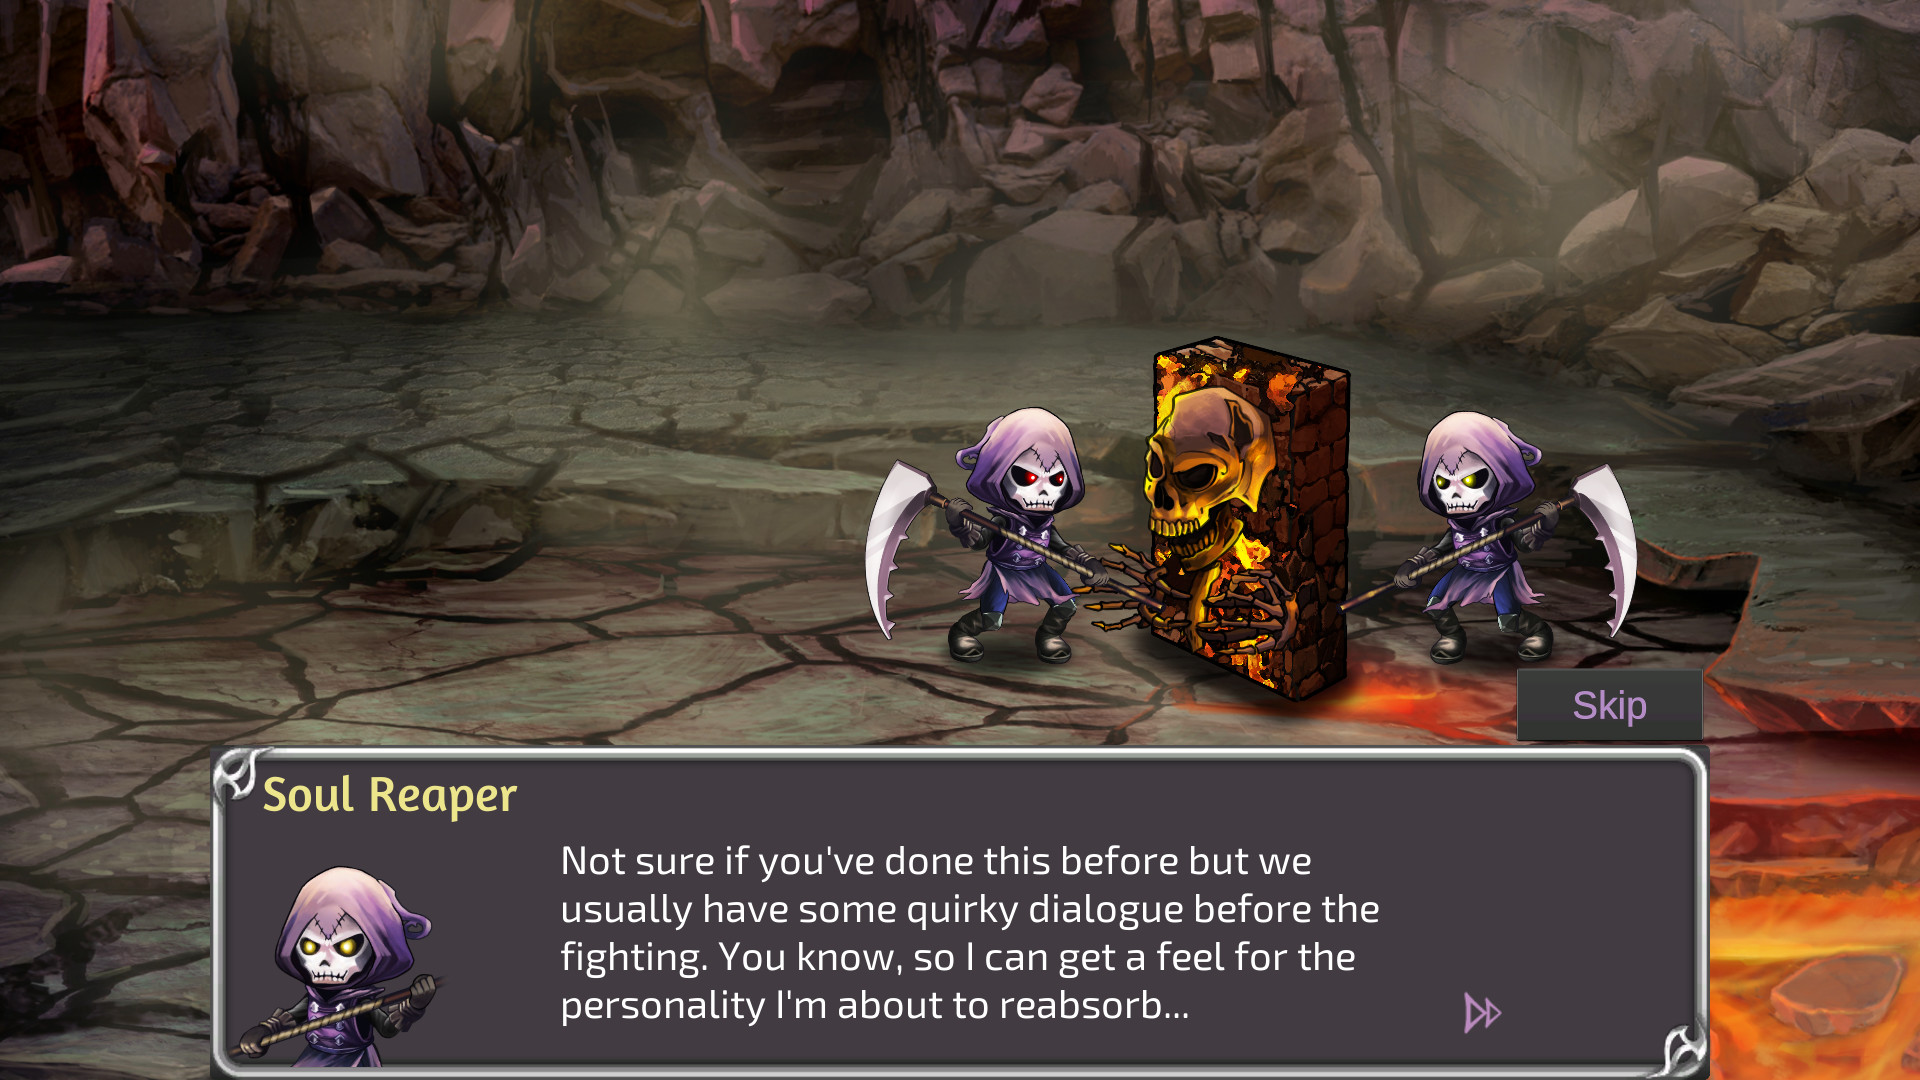 Reaper 2: How To Become A Soul Reaper In The Game?